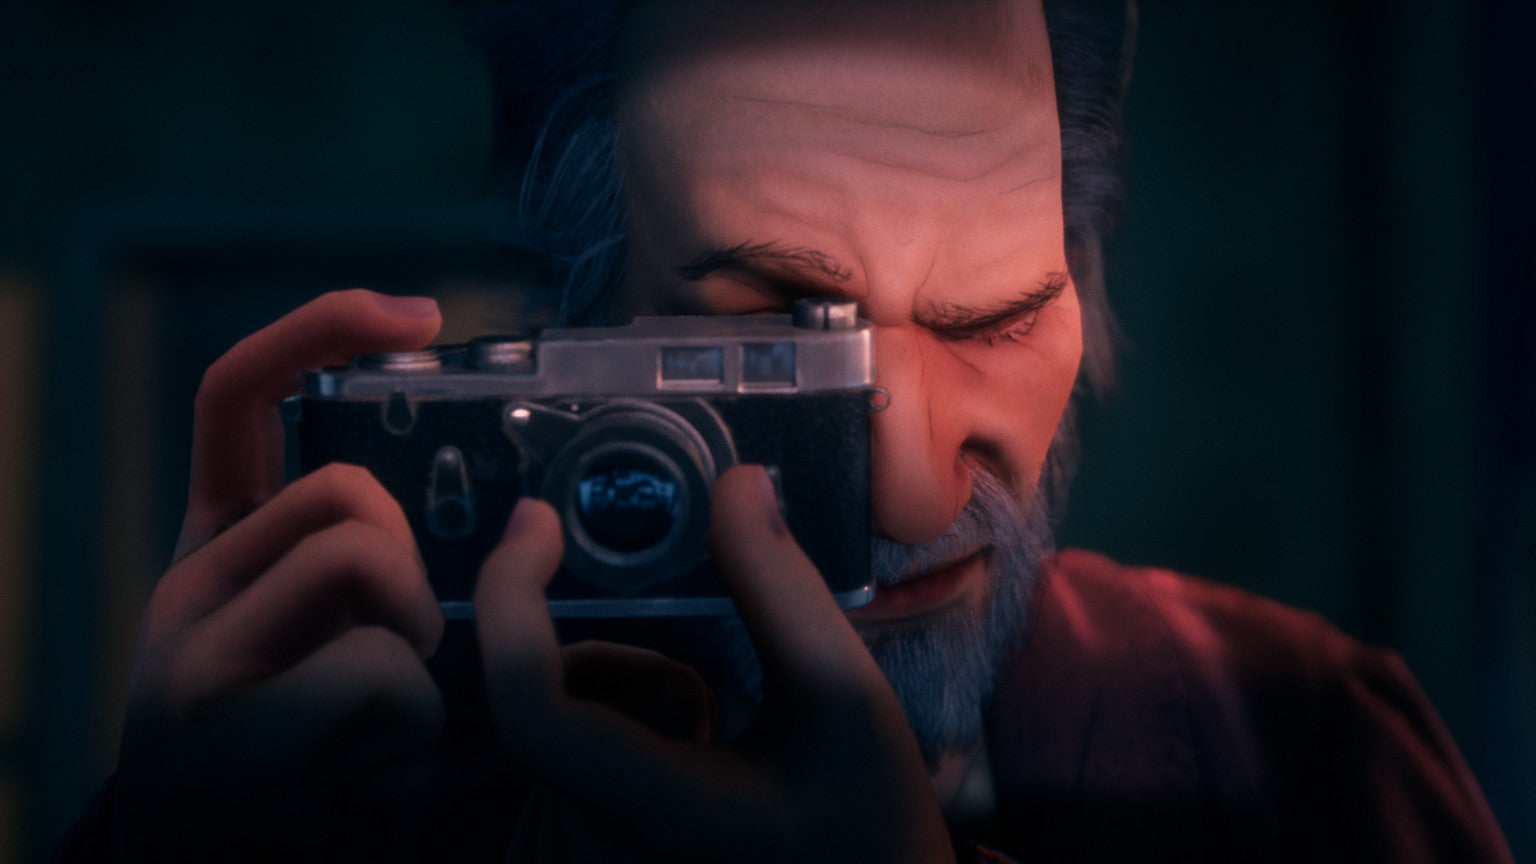 A close-up of man looking through the viewfinder of a camera, finger ready to take a picture, in a Conway: Disappearance At Dahlia View screenshot.